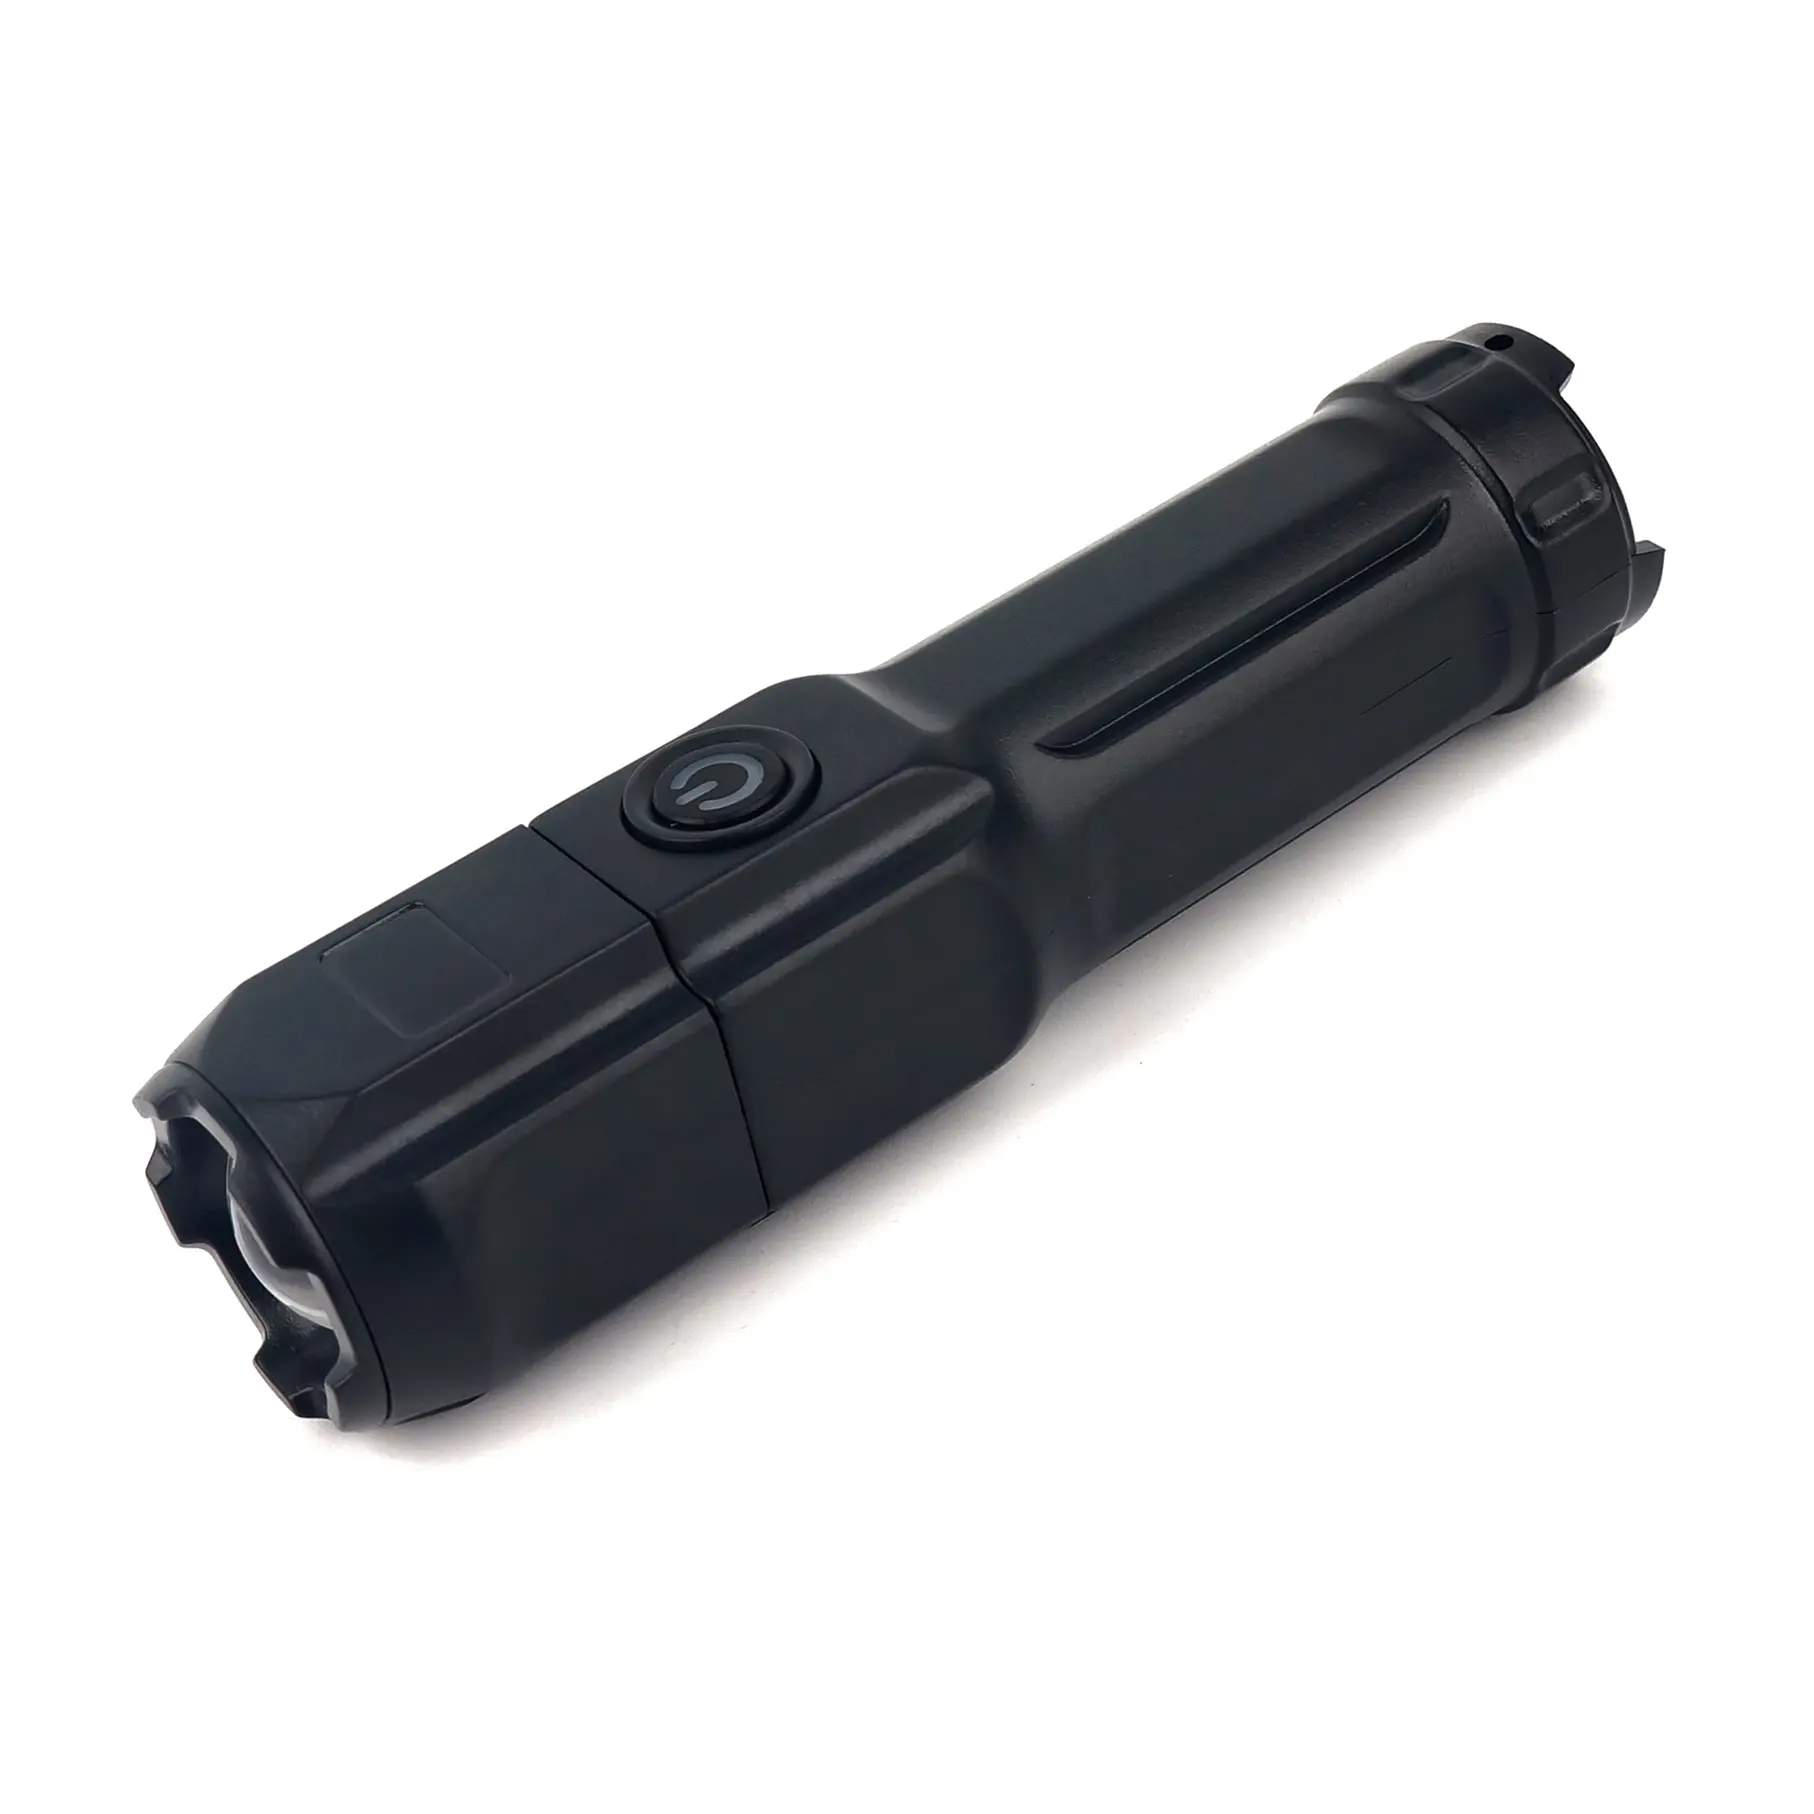 Led Flashlights USB Rechargeable light LED Torches Zoom Portable Plastic Tactical Flashlight